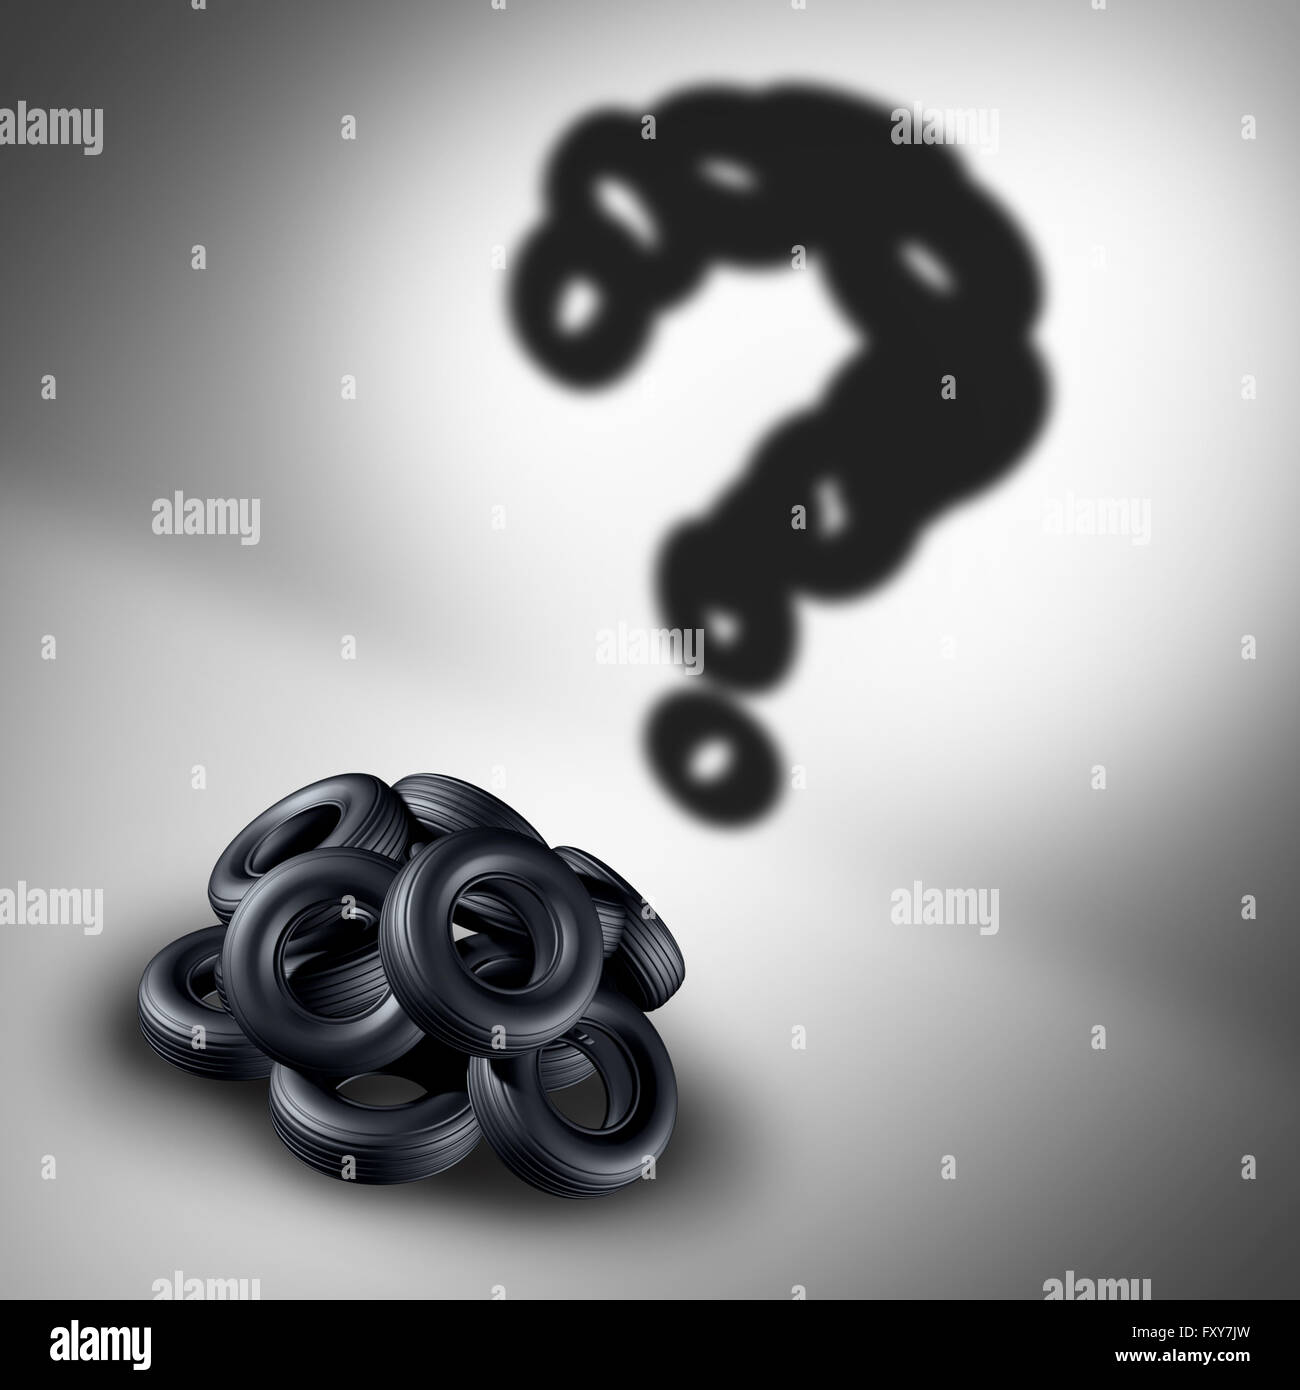 Tire and tyre questions car concept as a group of rubber wheels casting a shadow shaped as a question mark as an auto mechanic repair symbol on a white background as a 3D illustration transportation information icon. Stock Photo